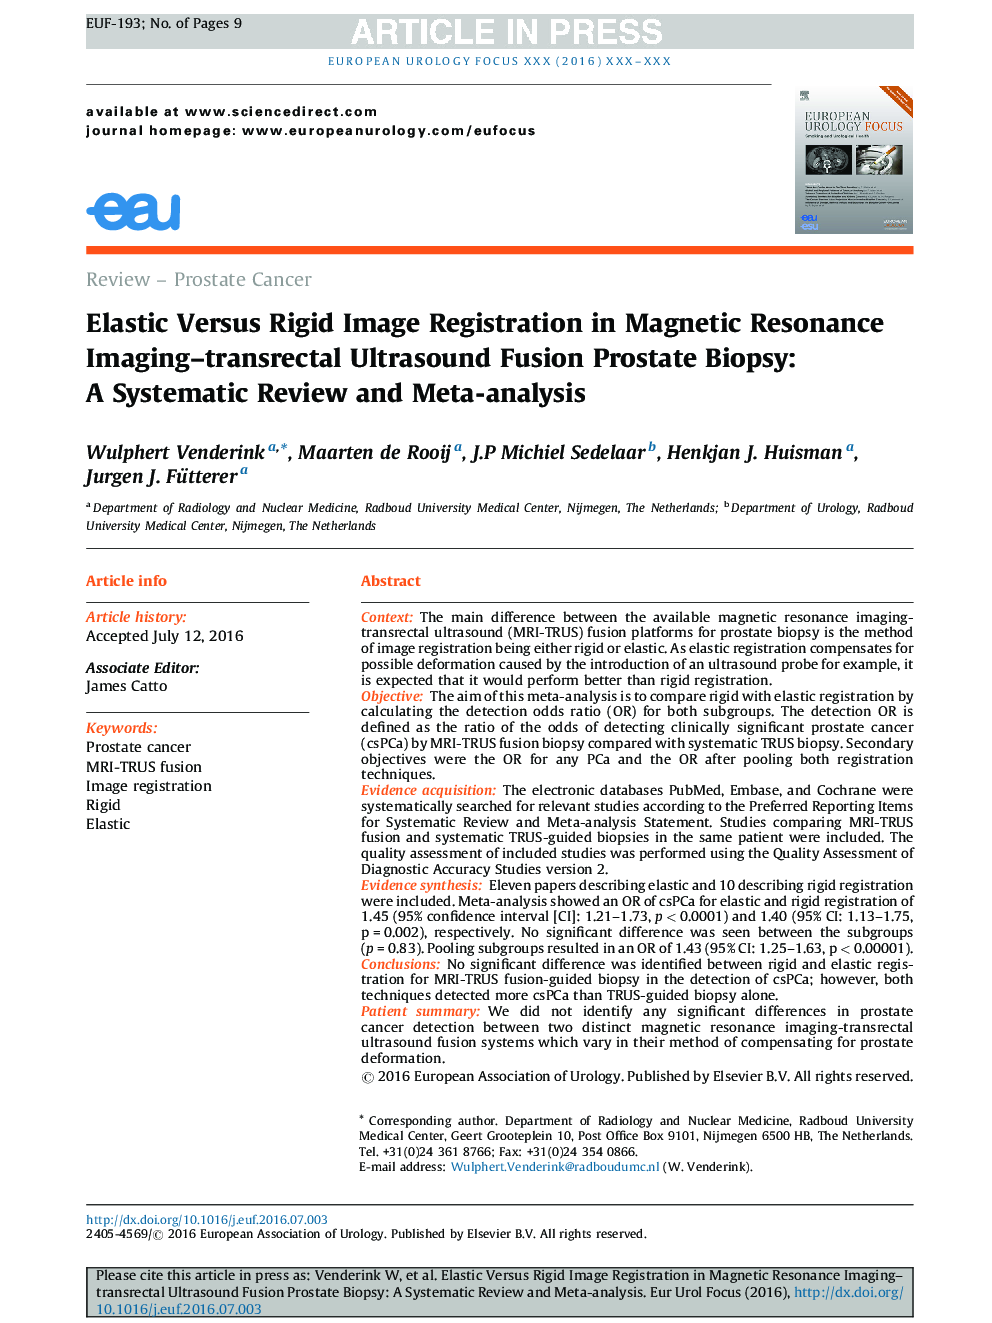 Elastic Versus Rigid Image Registration in Magnetic Resonance Imaging-transrectal Ultrasound Fusion Prostate Biopsy: A Systematic Review and Meta-analysis